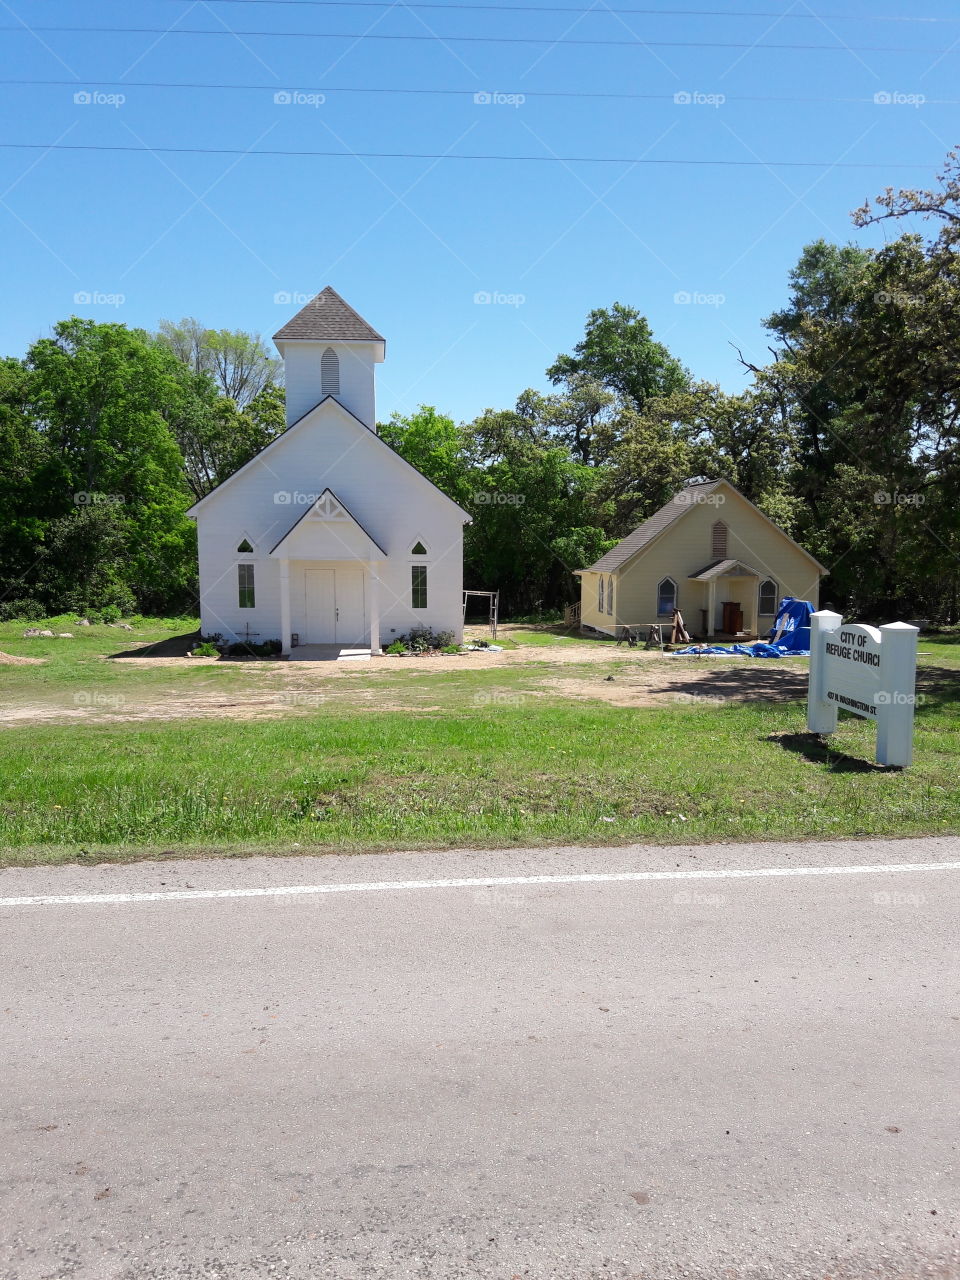 Old church  in country.